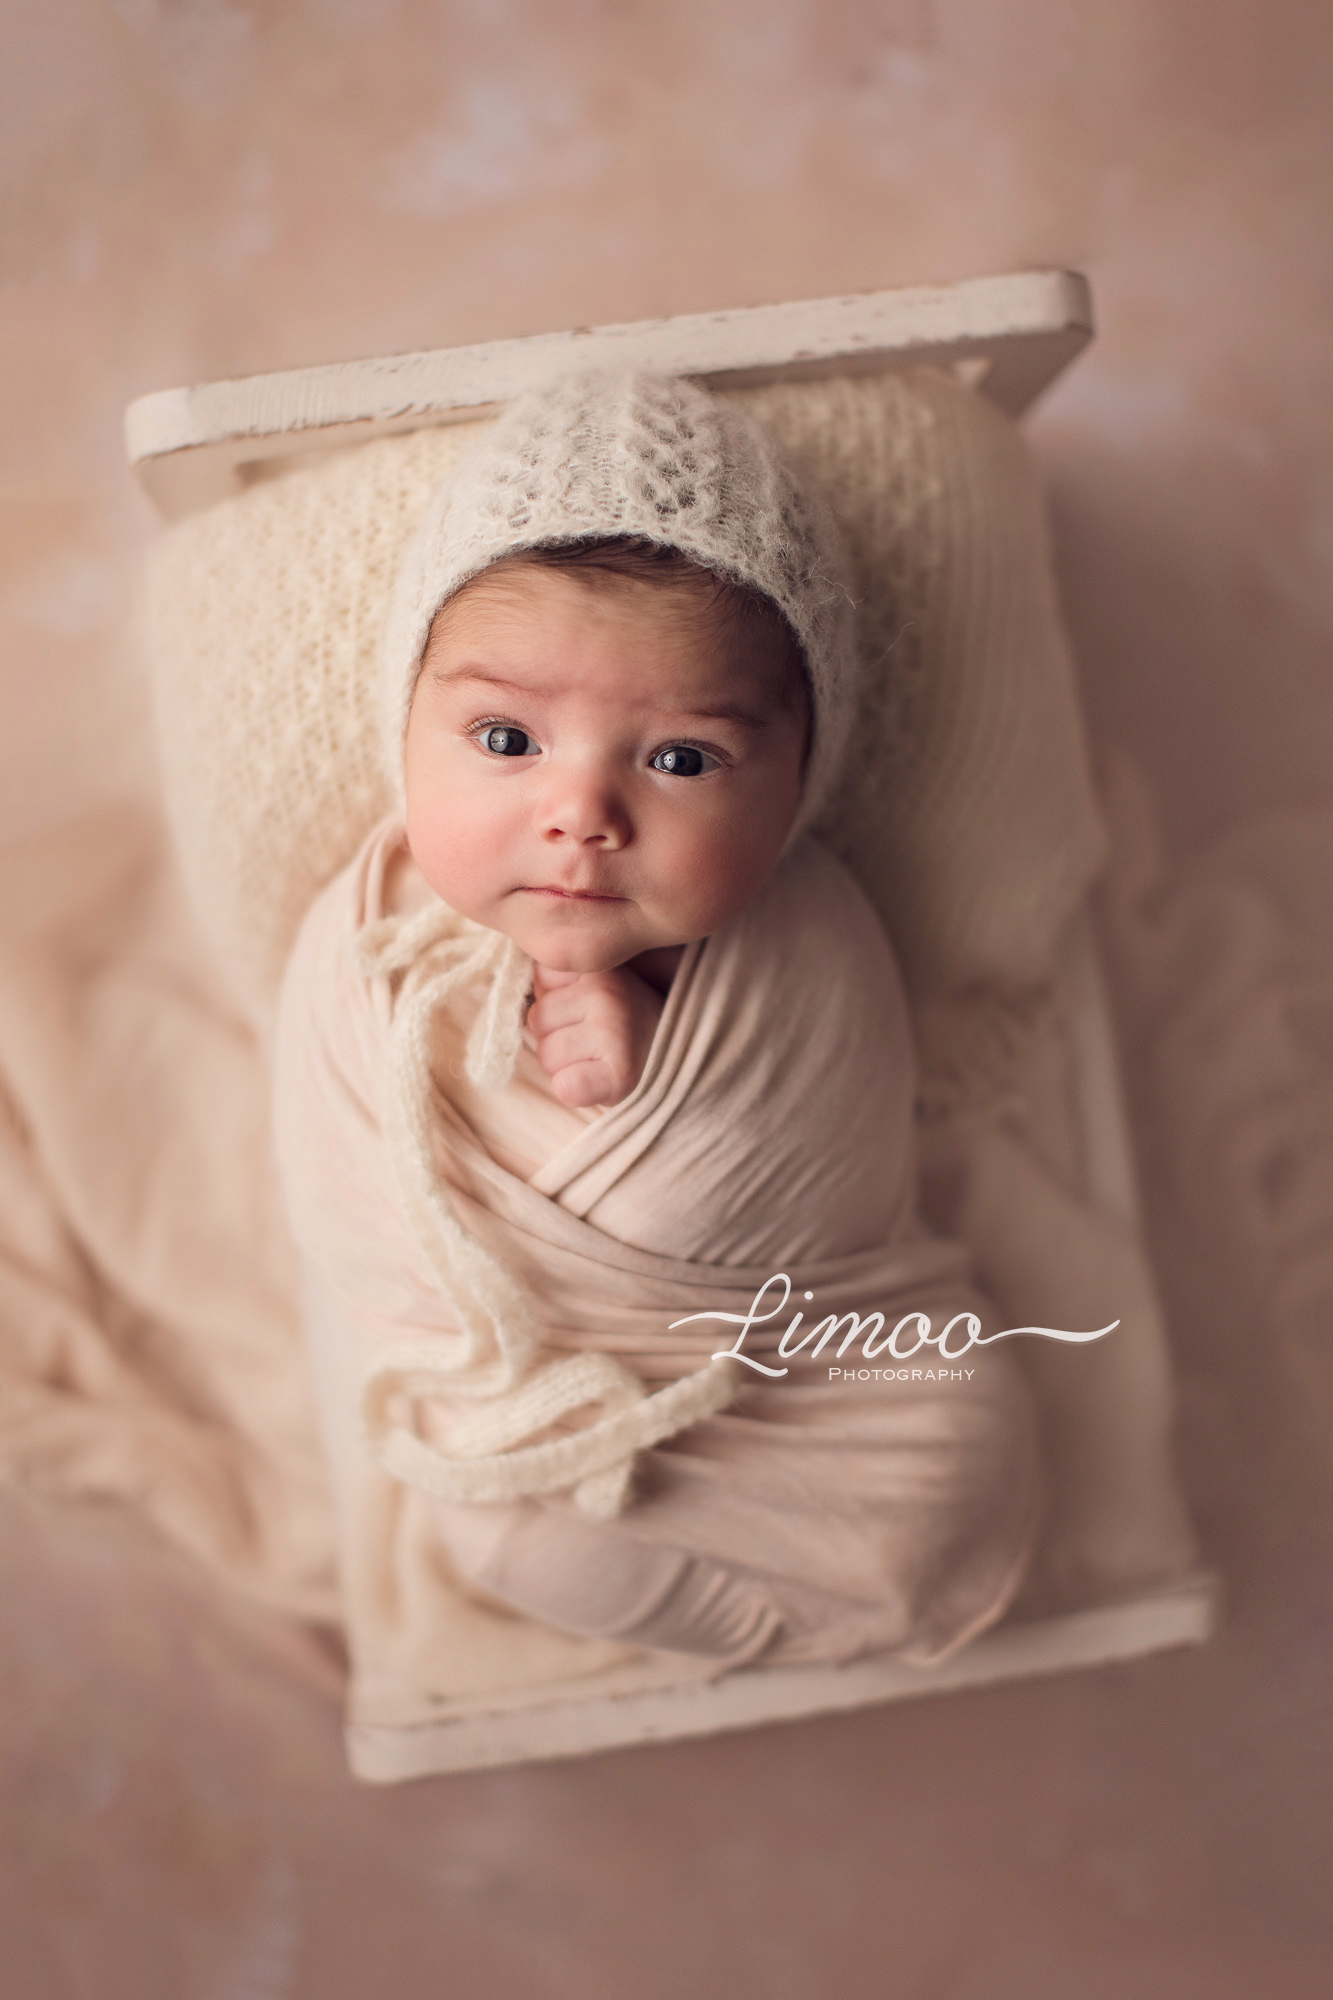 Newborn-Photo-Session-by-Limoo-Photography-a-Gift-for-pregnant-expecting-parents-Bay-Area